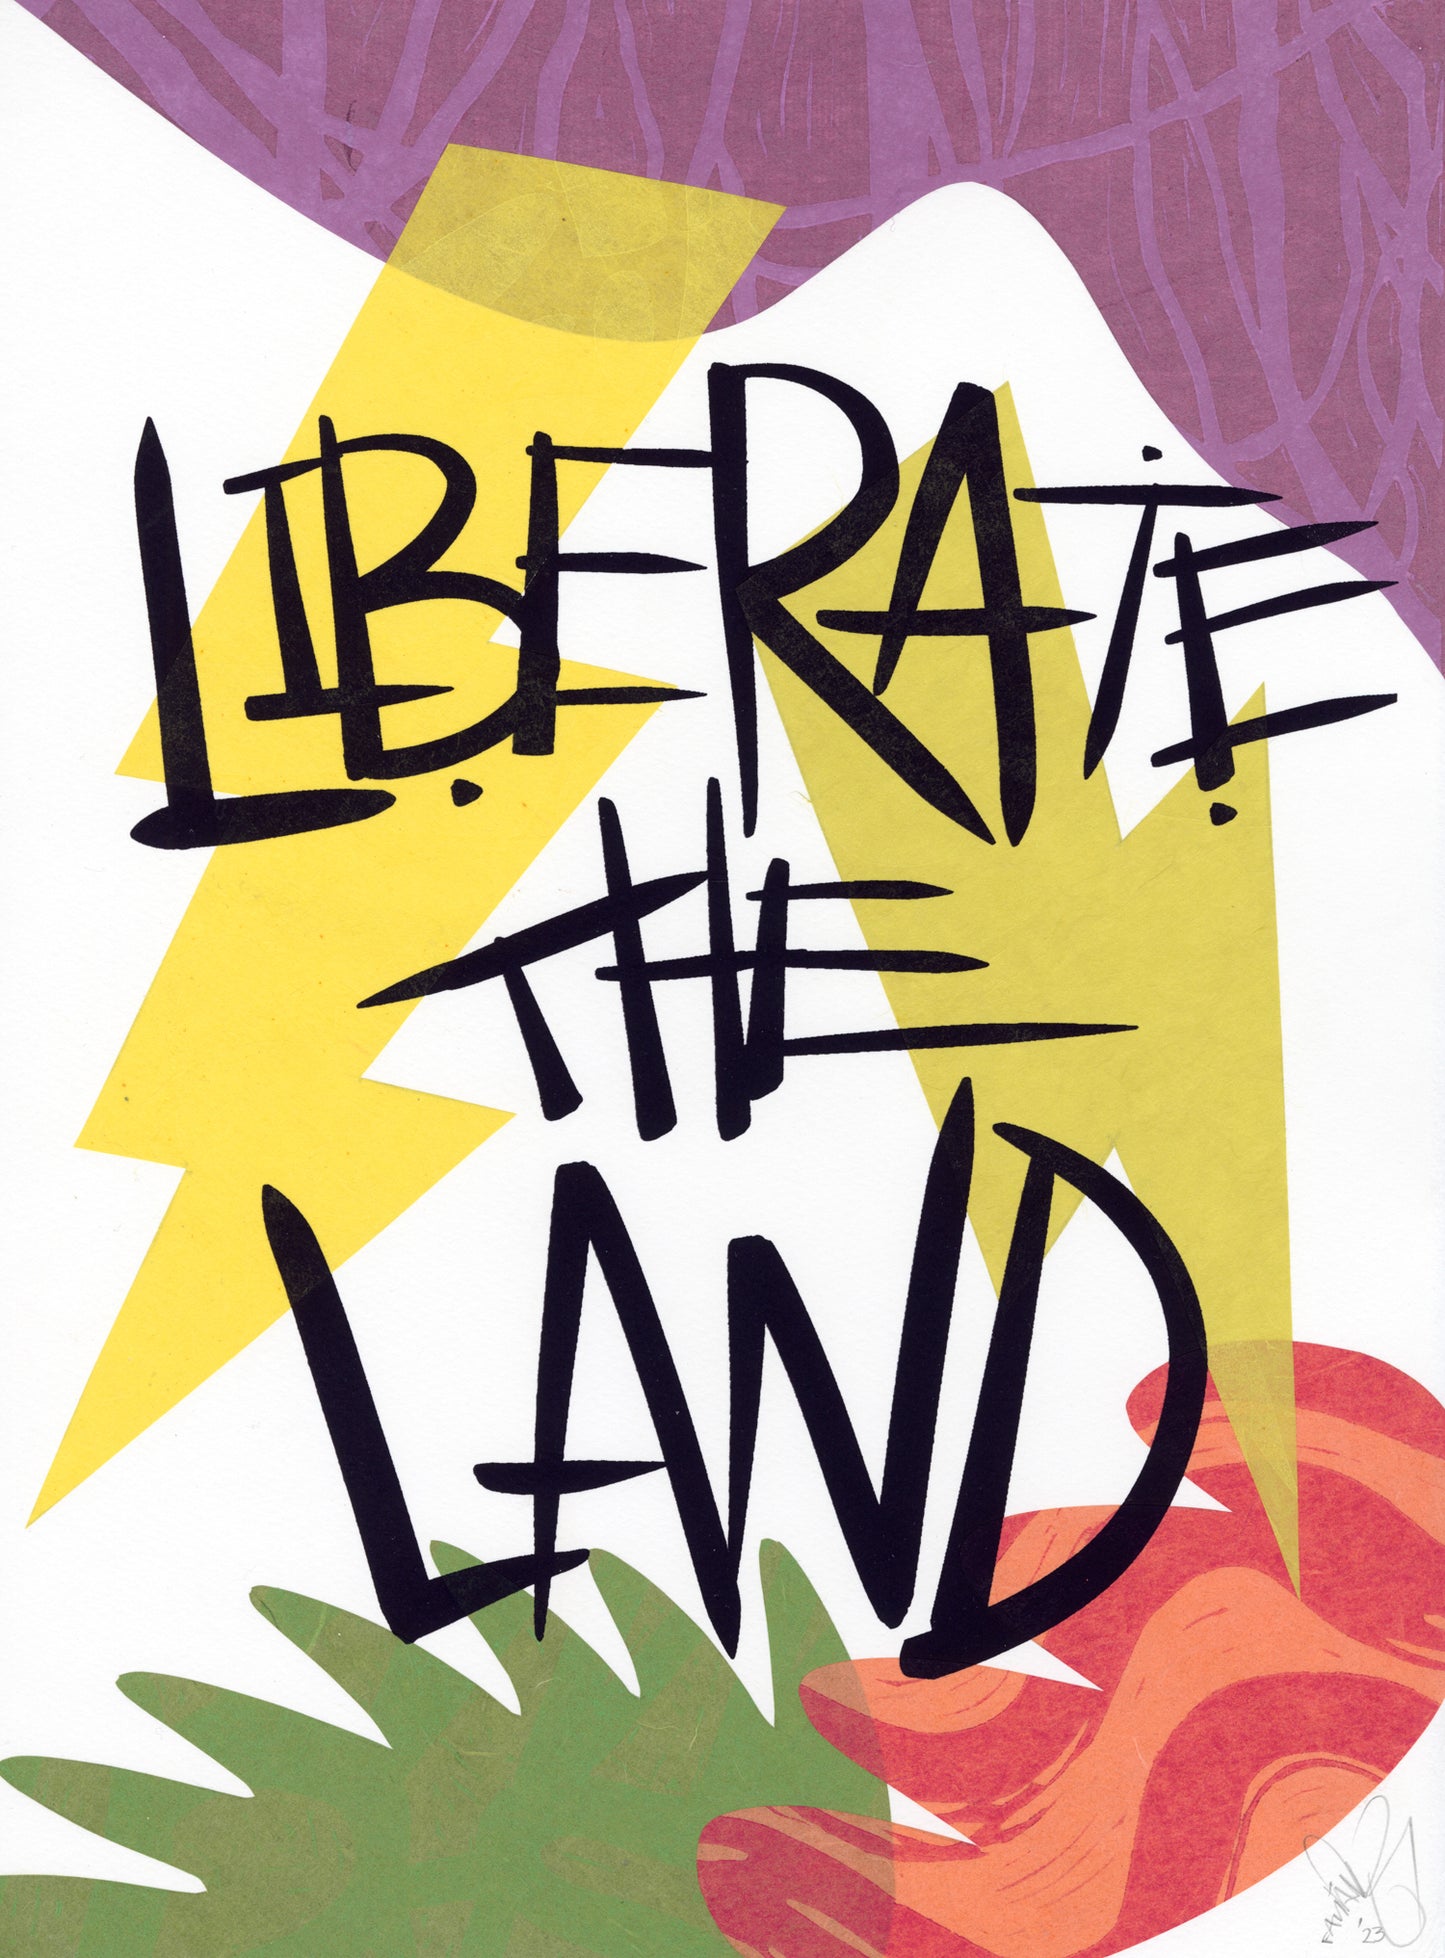 Liberate The Land 32